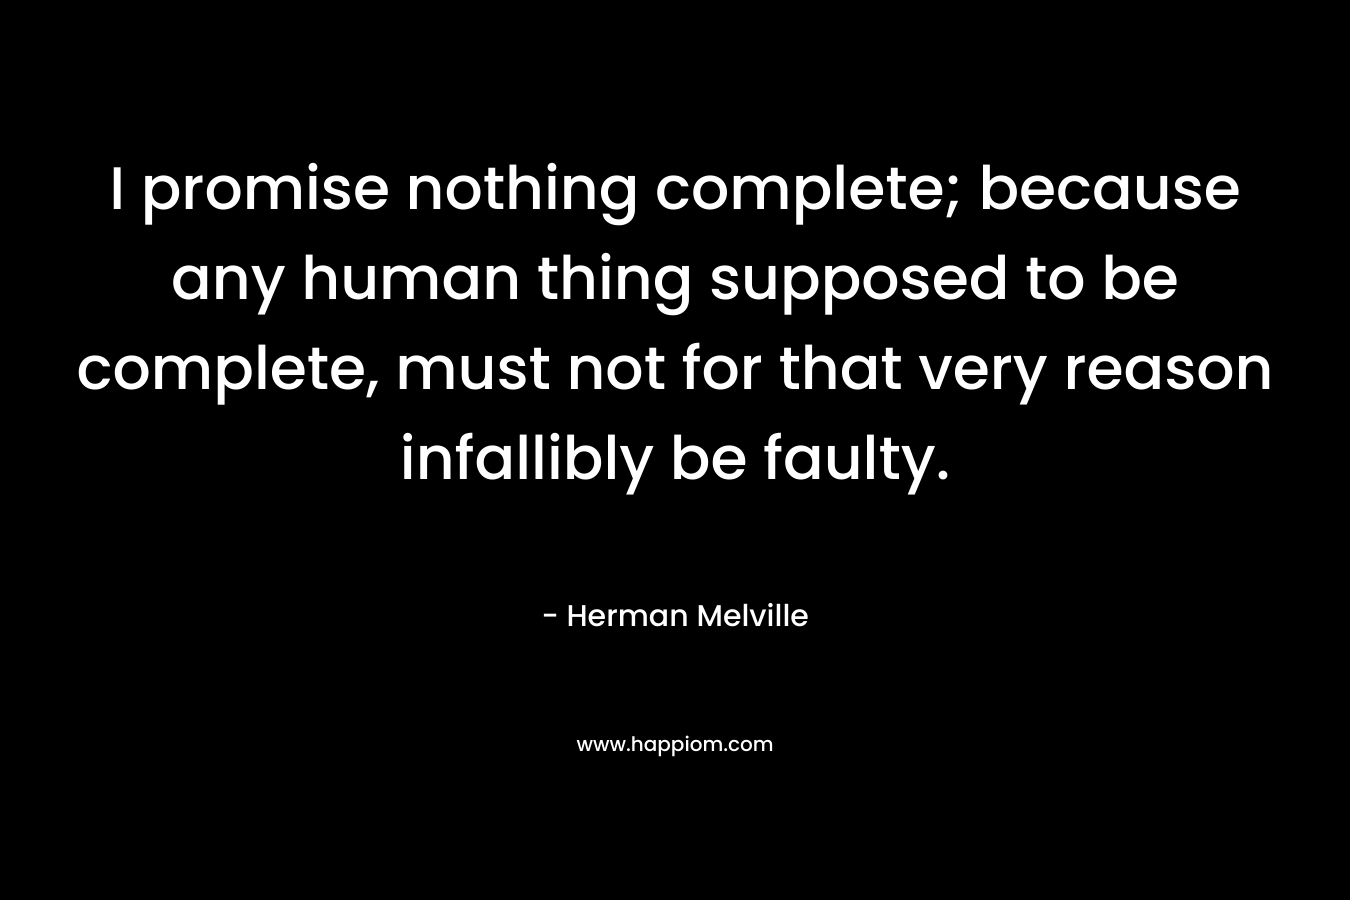 I promise nothing complete; because any human thing supposed to be complete, must not for that very reason infallibly be faulty.